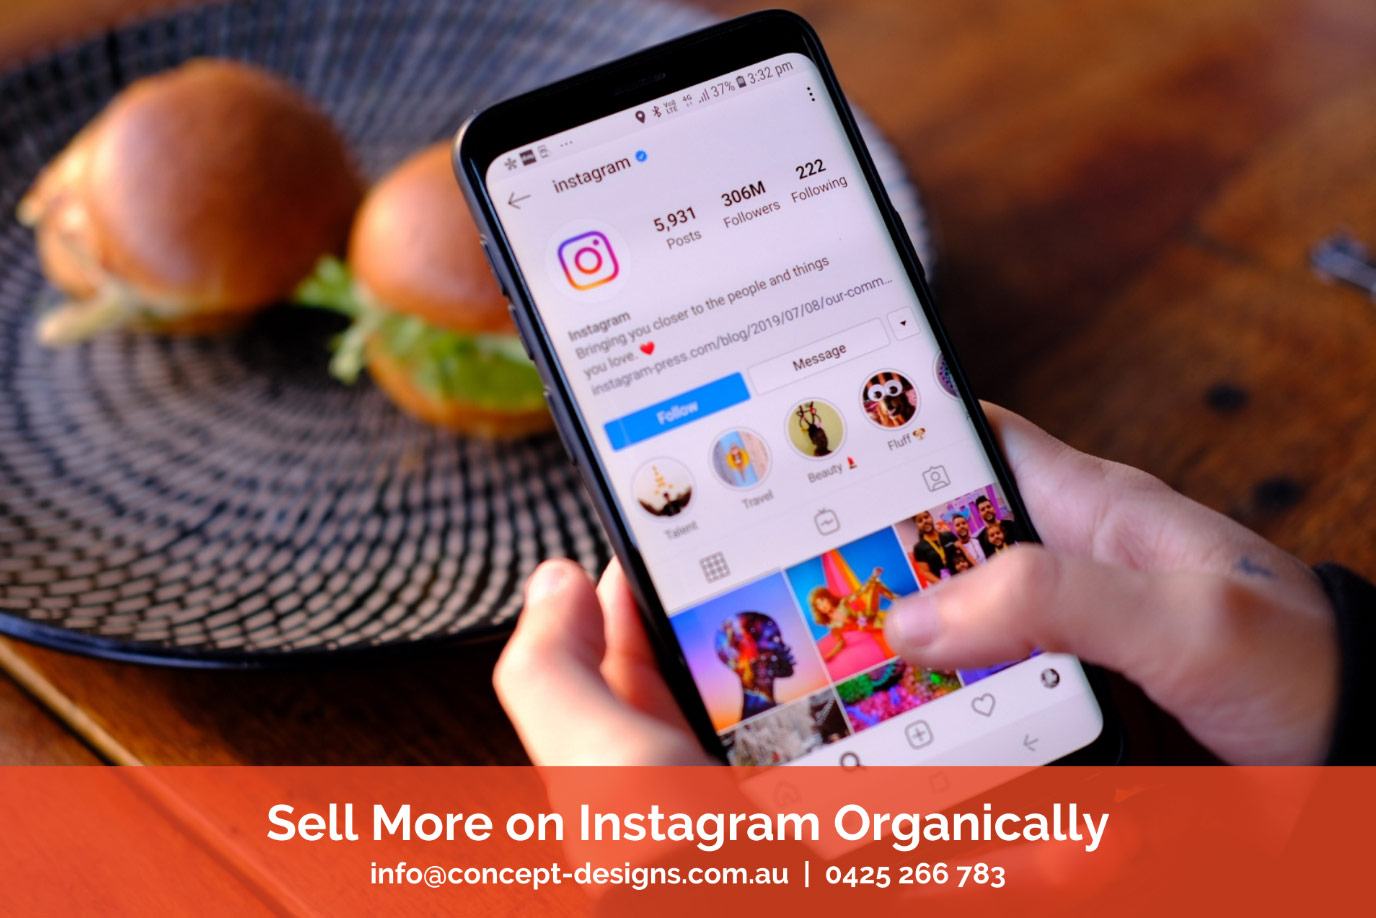 Sell More on Instagram Organically